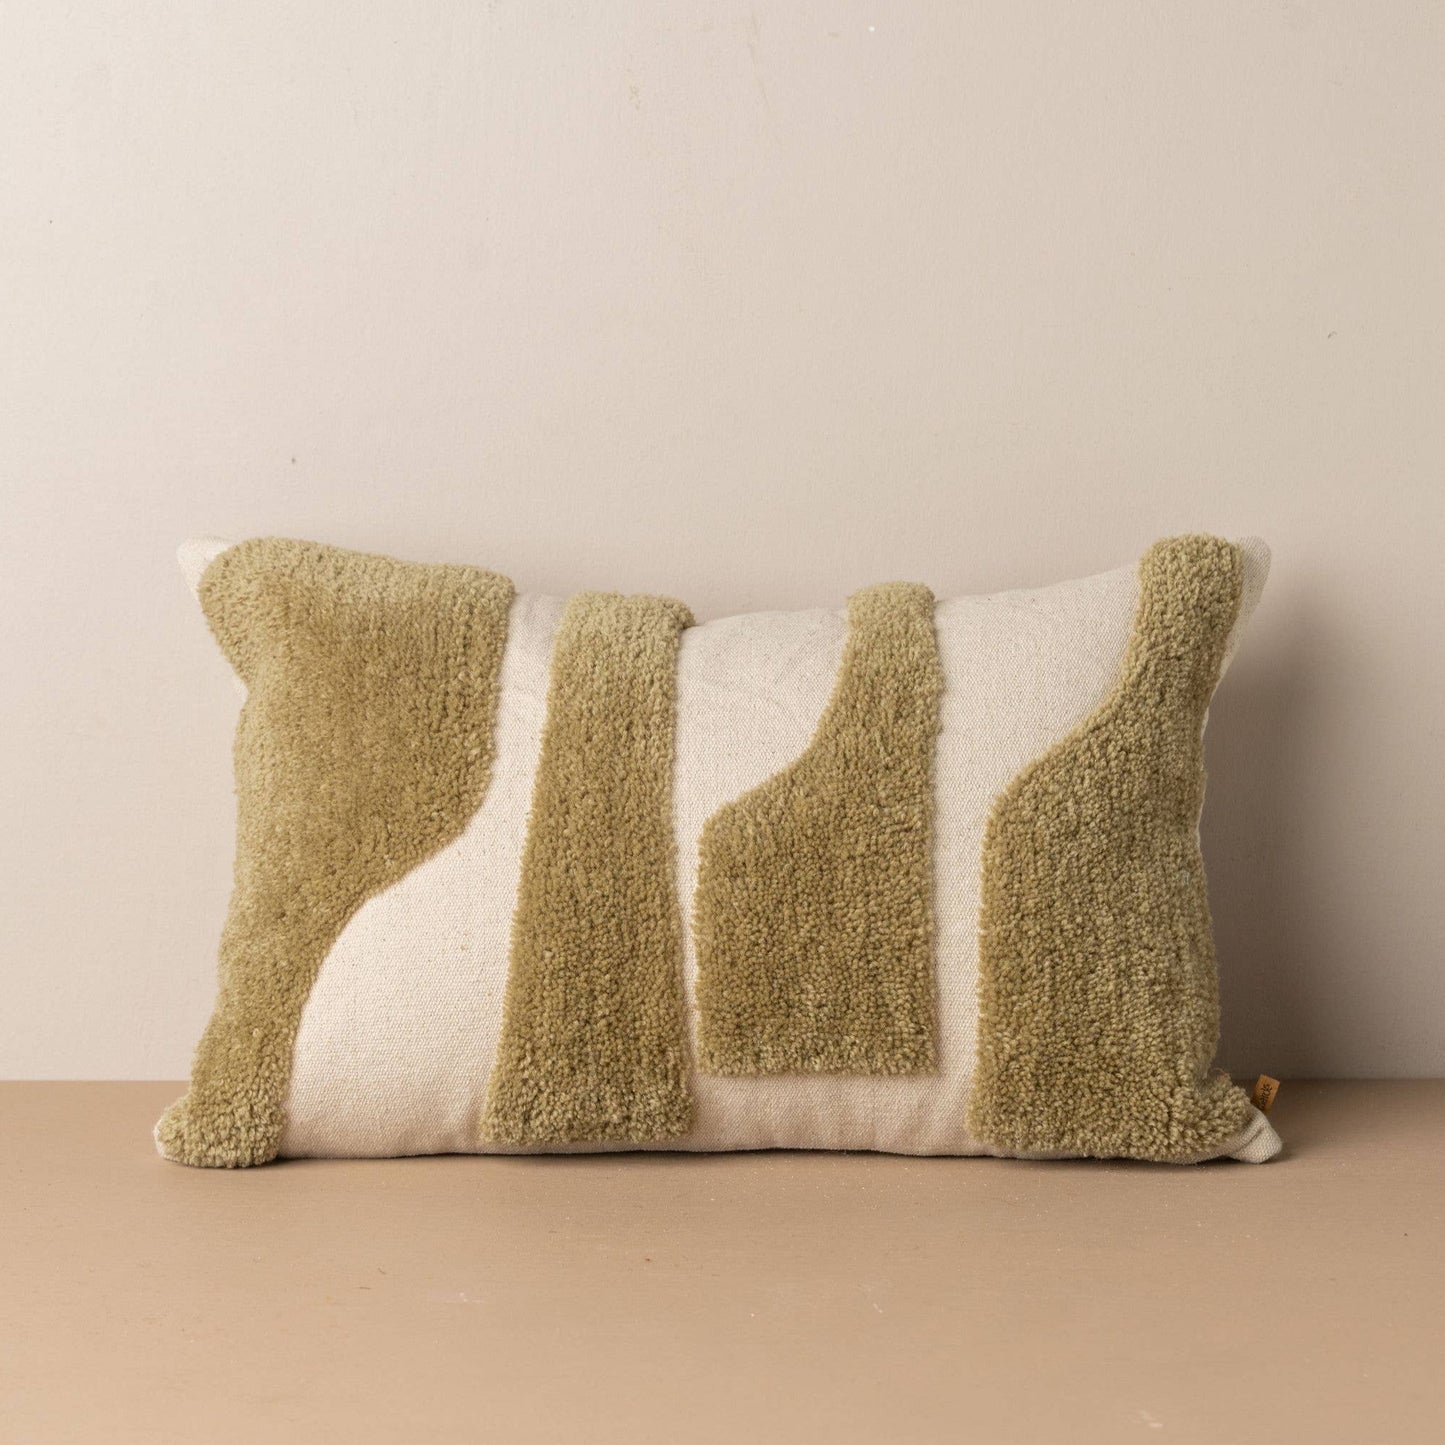 Abstract Cushions in Olive